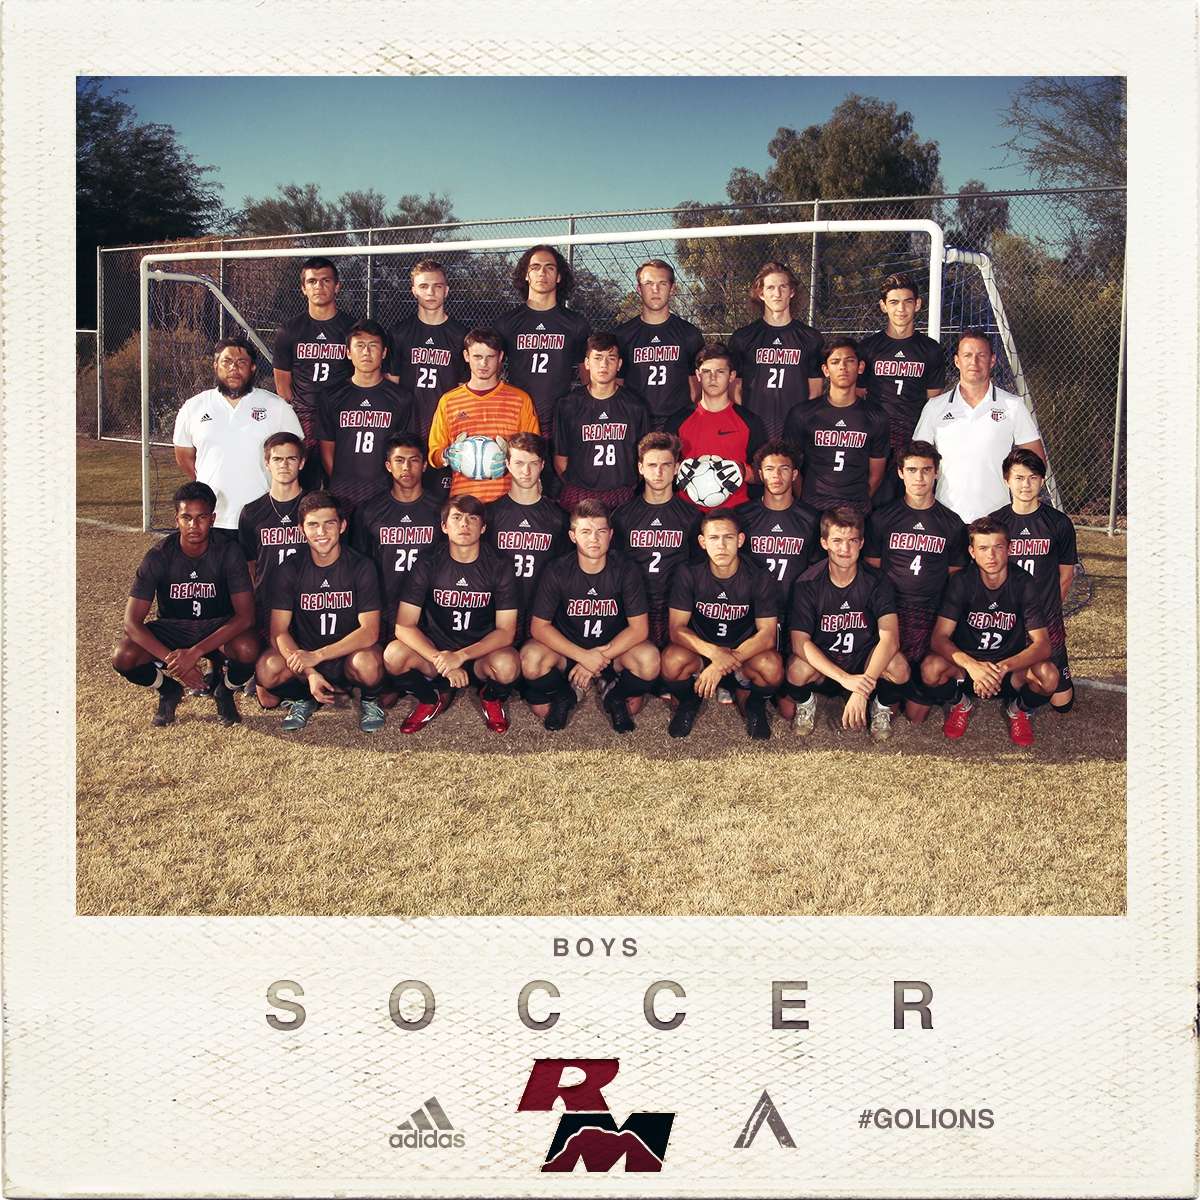 Red Mountain High School Soccer Logo - Red Mountain High School Boys Soccer